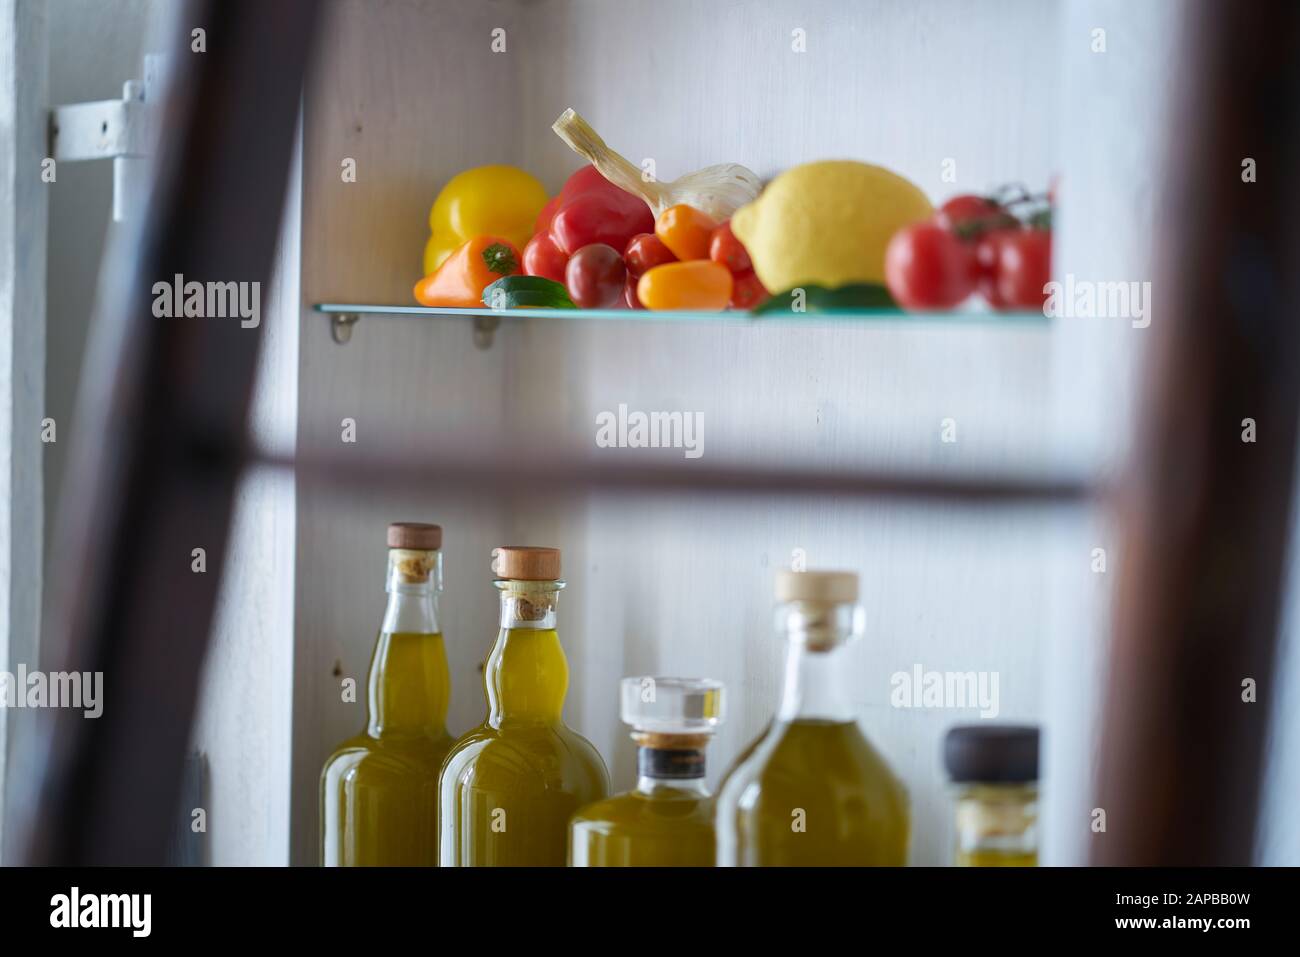 still life closeup vegetable in kitchen shelf detail bottles olive oil kitchen rural rustic country,glass deco gold food cooking natural nice organic Stock Photo